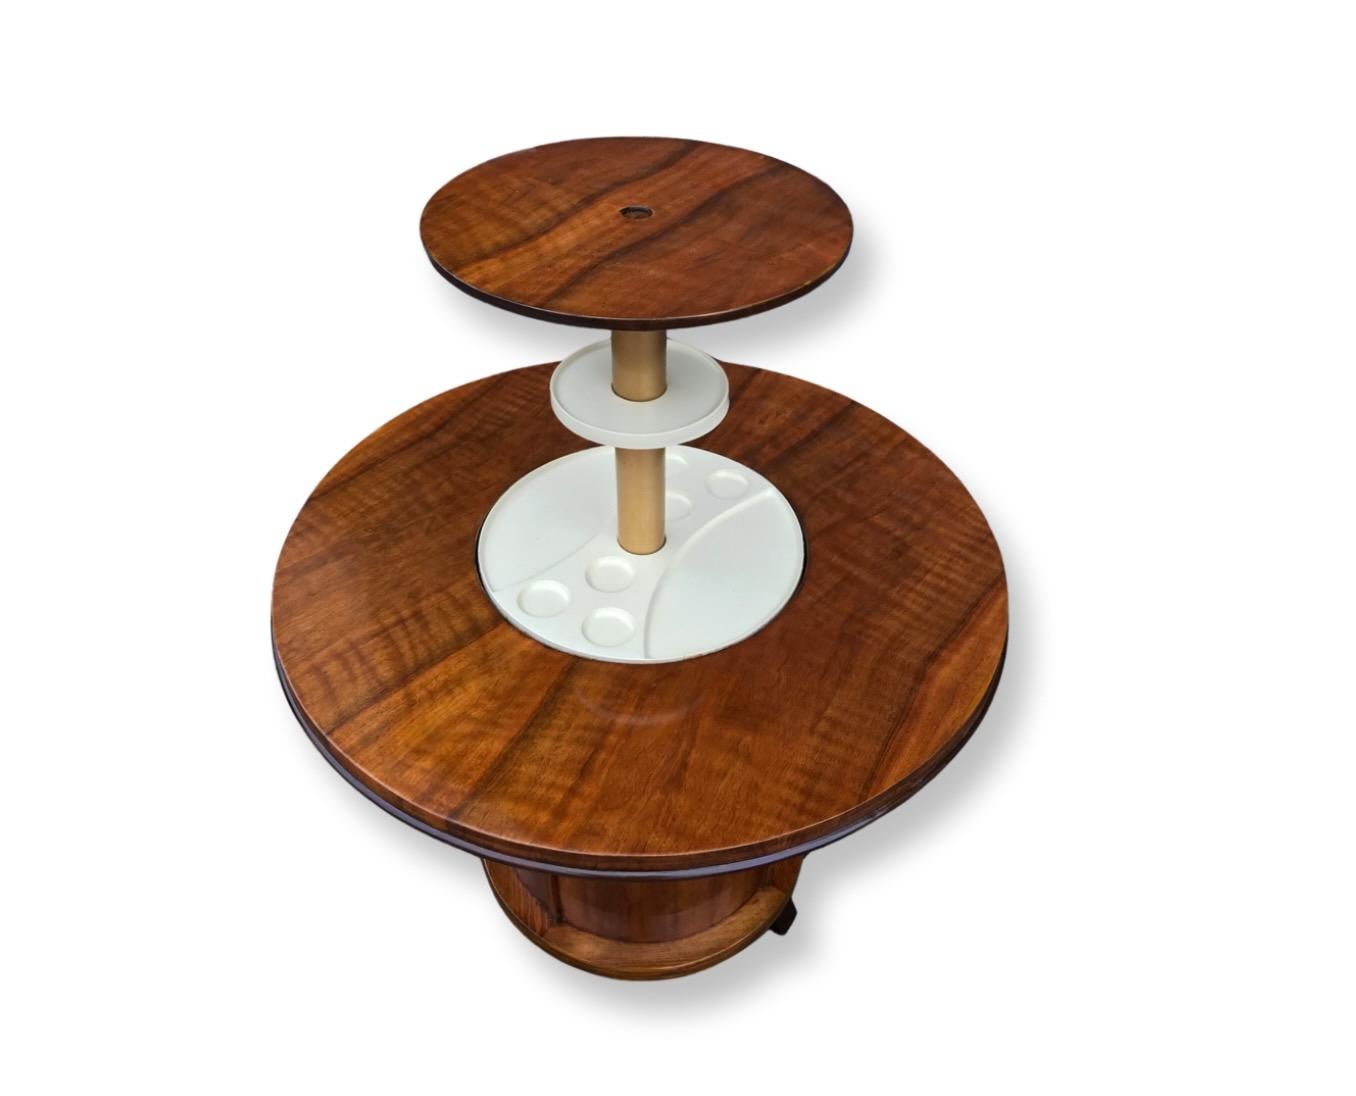 A stunning and rare Art Deco pop up cocktail table, dating to circa 1930,  in striking figured walnut, a lovely warm mellow tone. In excellent condition, the mechanism of this beautiful table works by simply pressing a central button found in the